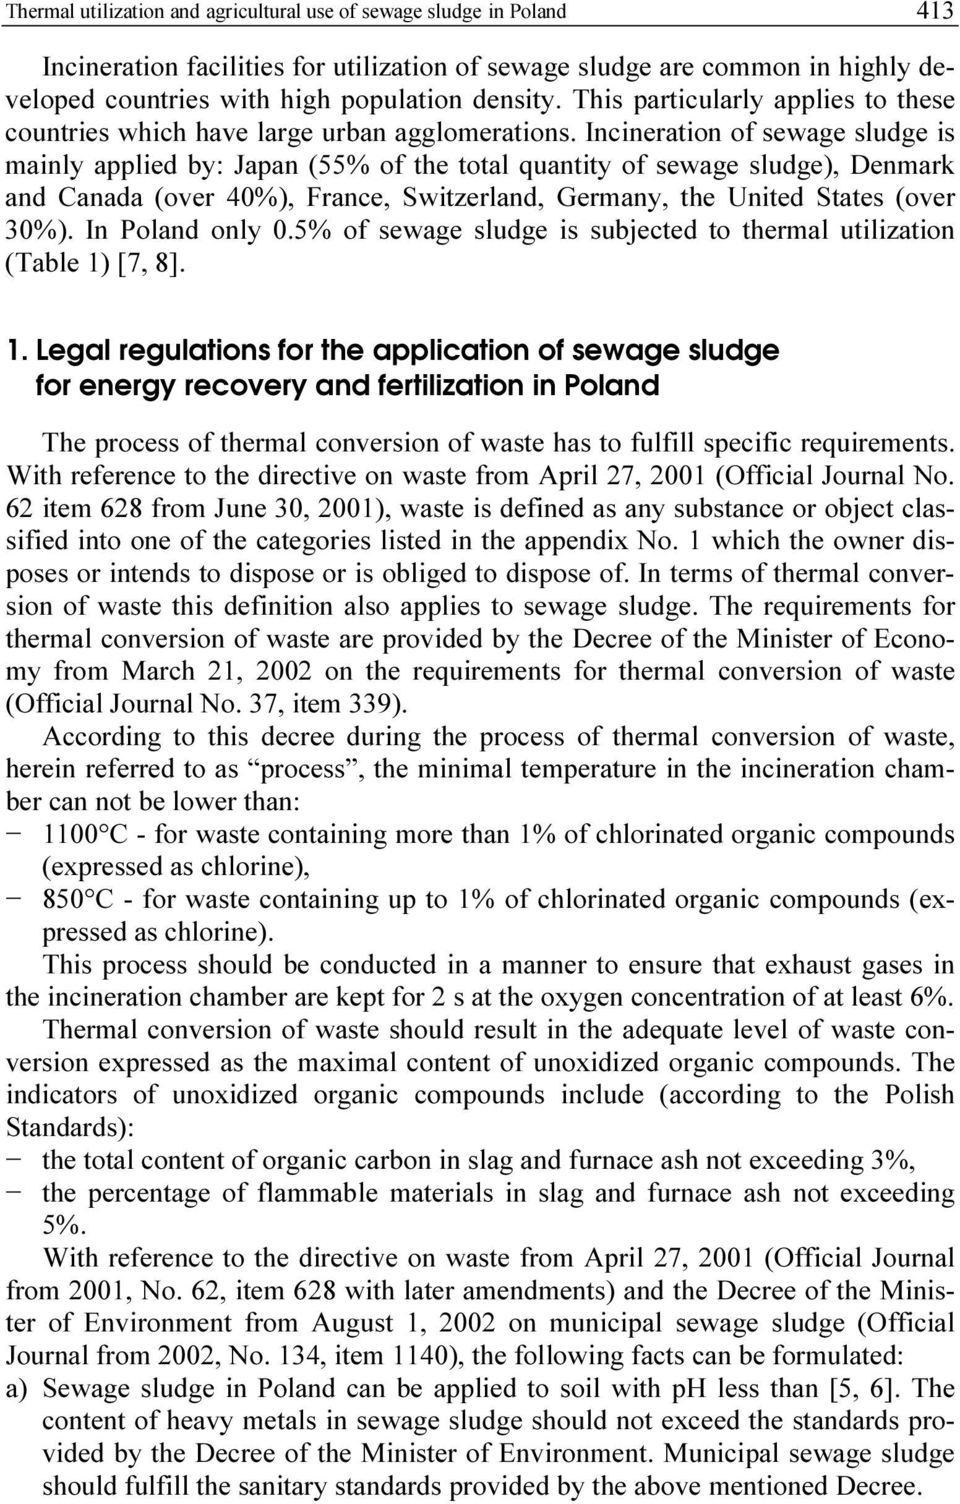 Incineration of sewage sludge is mainly applied by: Japan (55 of the total quantity of sewage sludge), Denmark and Canada (over 40), France, Switzerland, Germany, the United States (over 30).